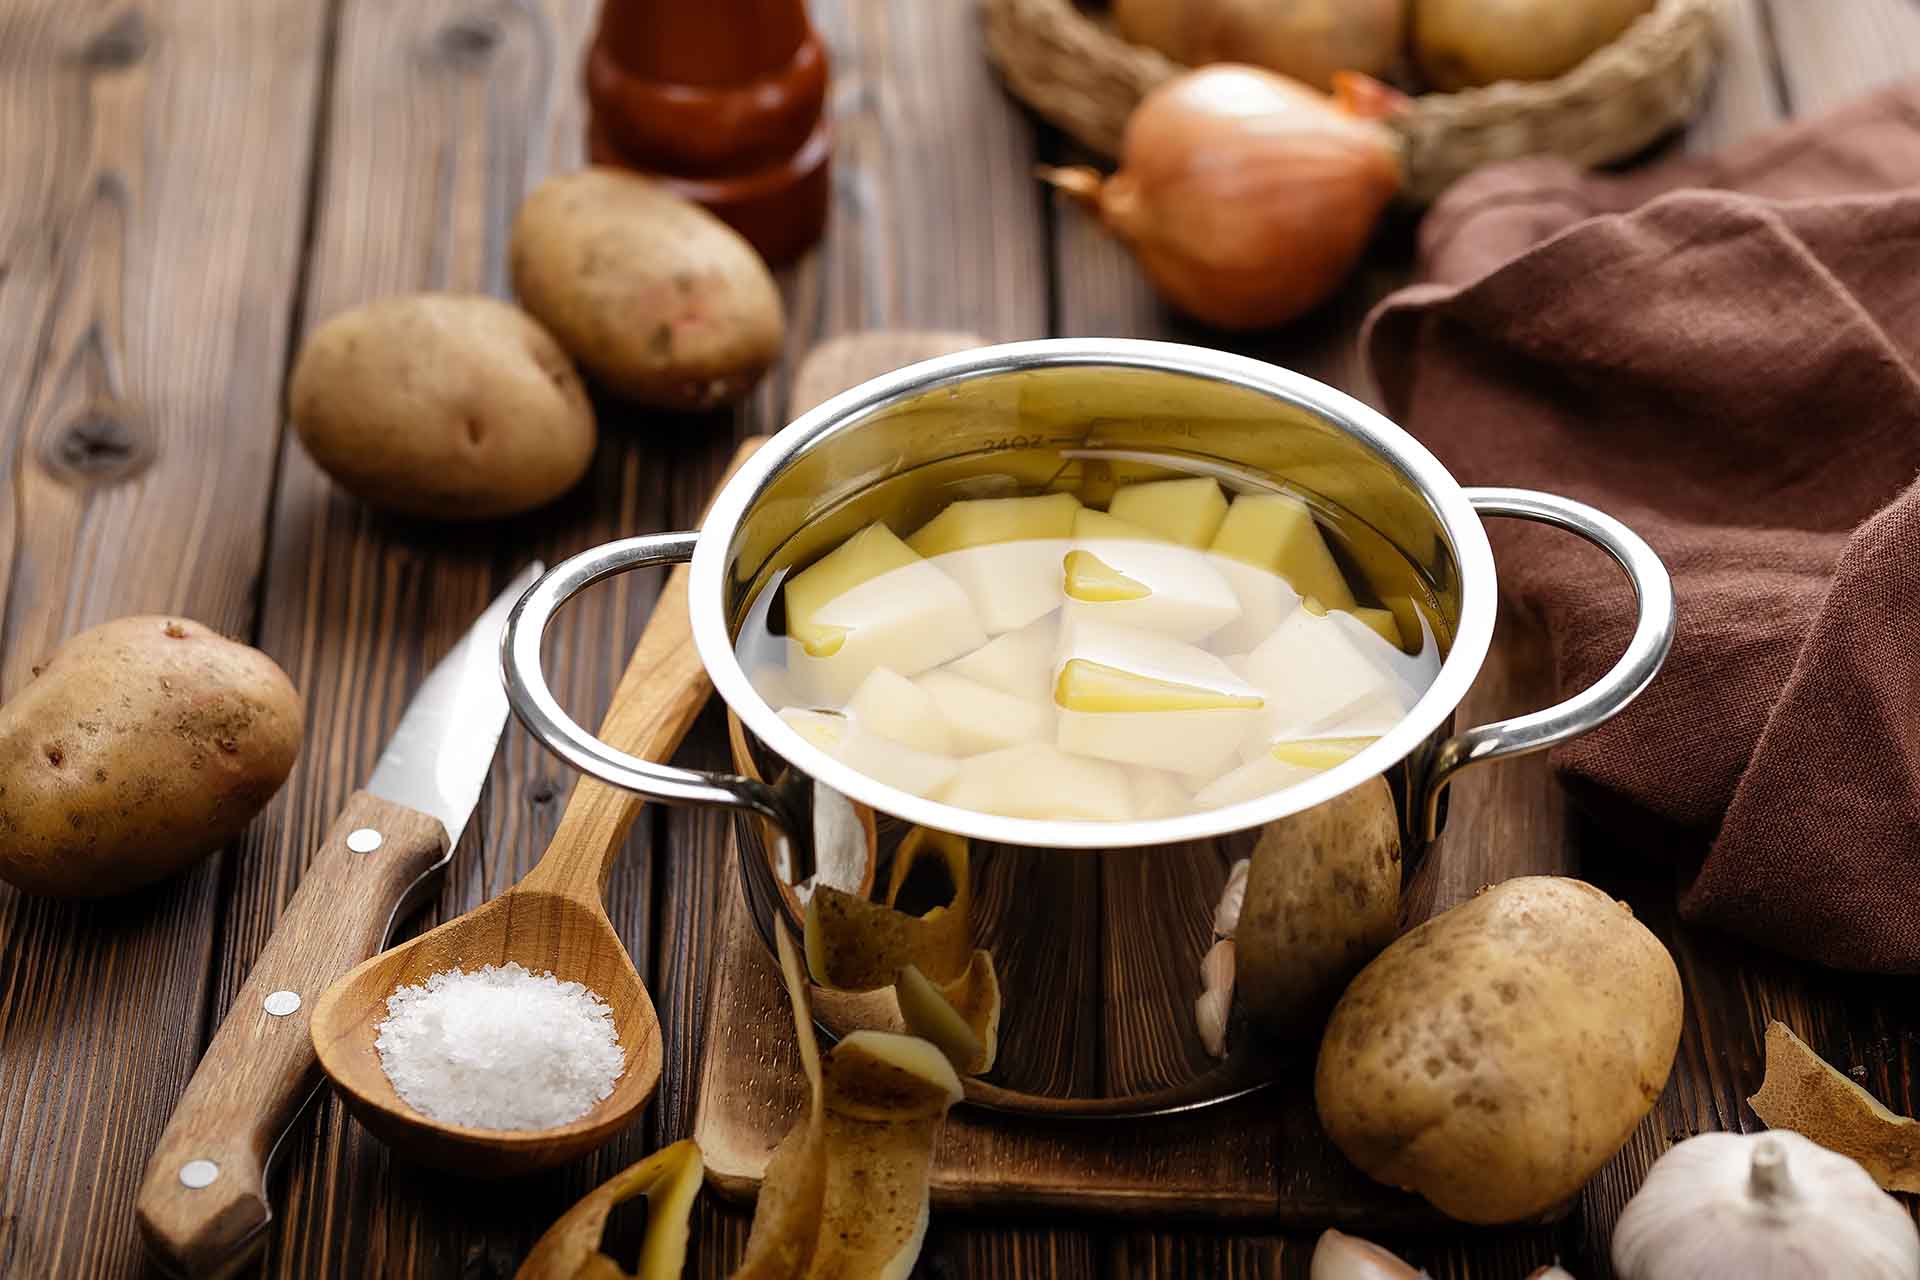 A pot full of water and cut potatoes sitting on a wooden table surrounded by whole potatoes, onions, garlic, and a knife.